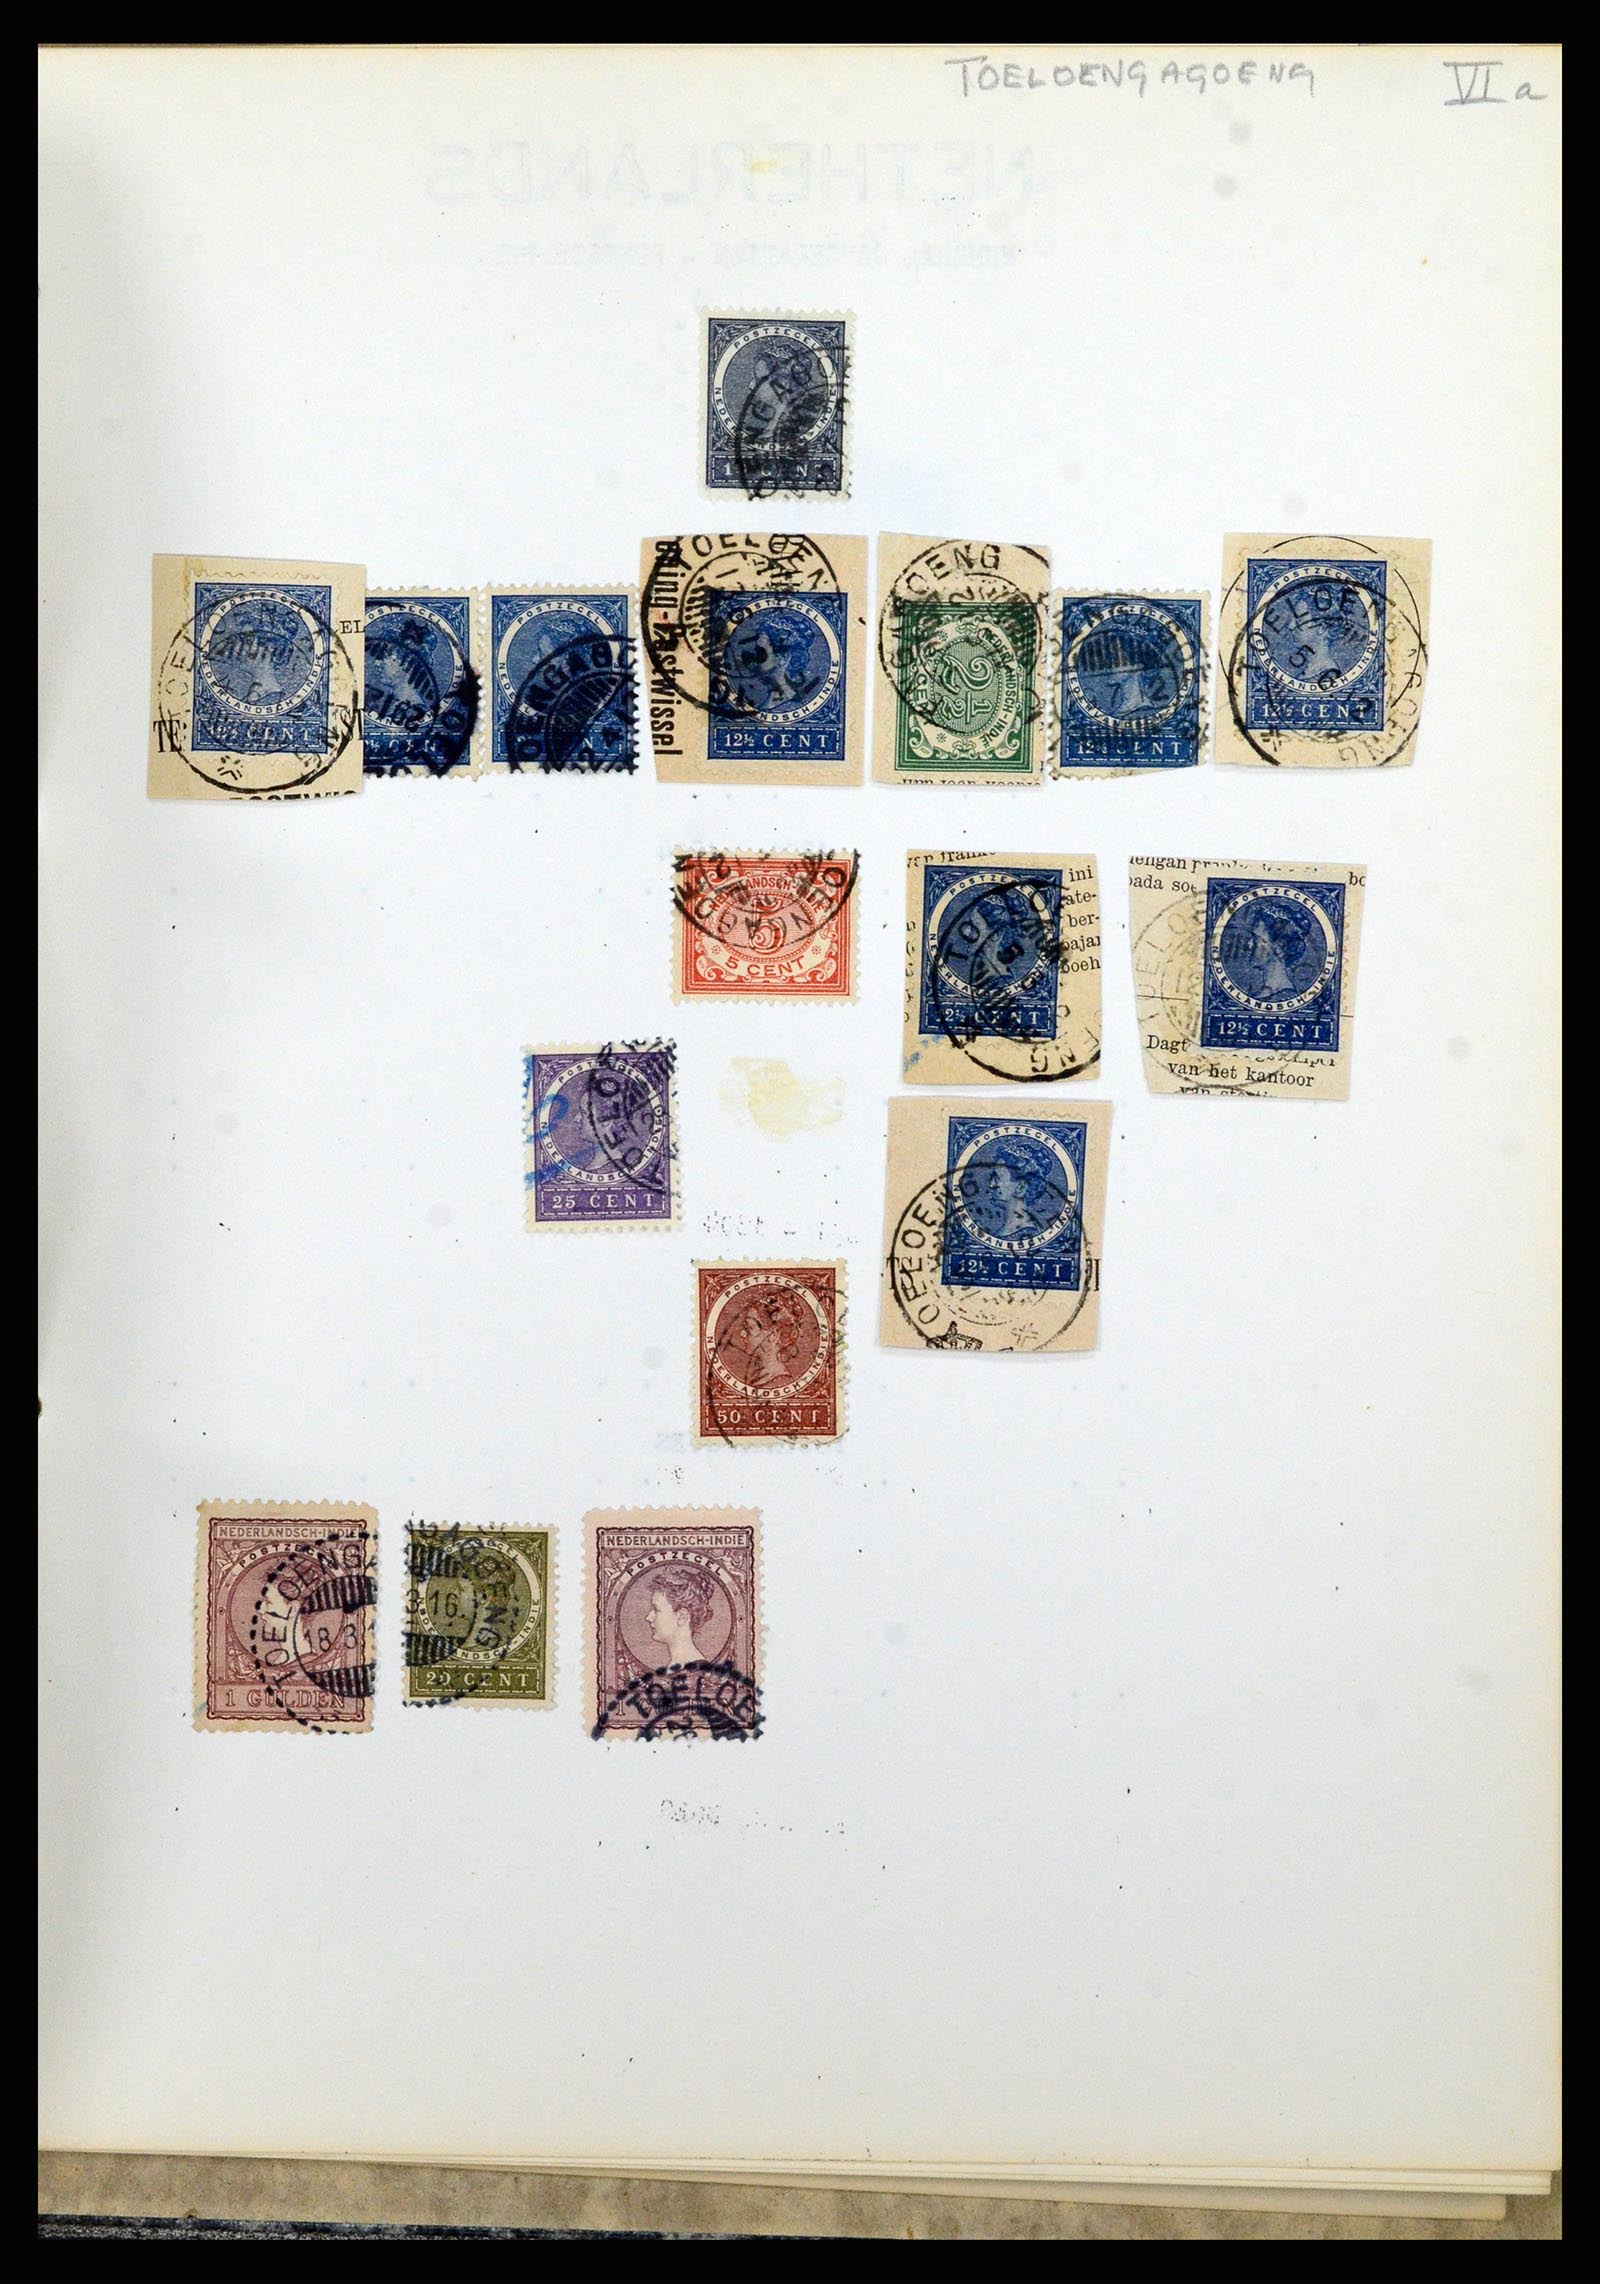 36841 180 - Stamp collection 36841 Dutch east Indies short bar cancels.